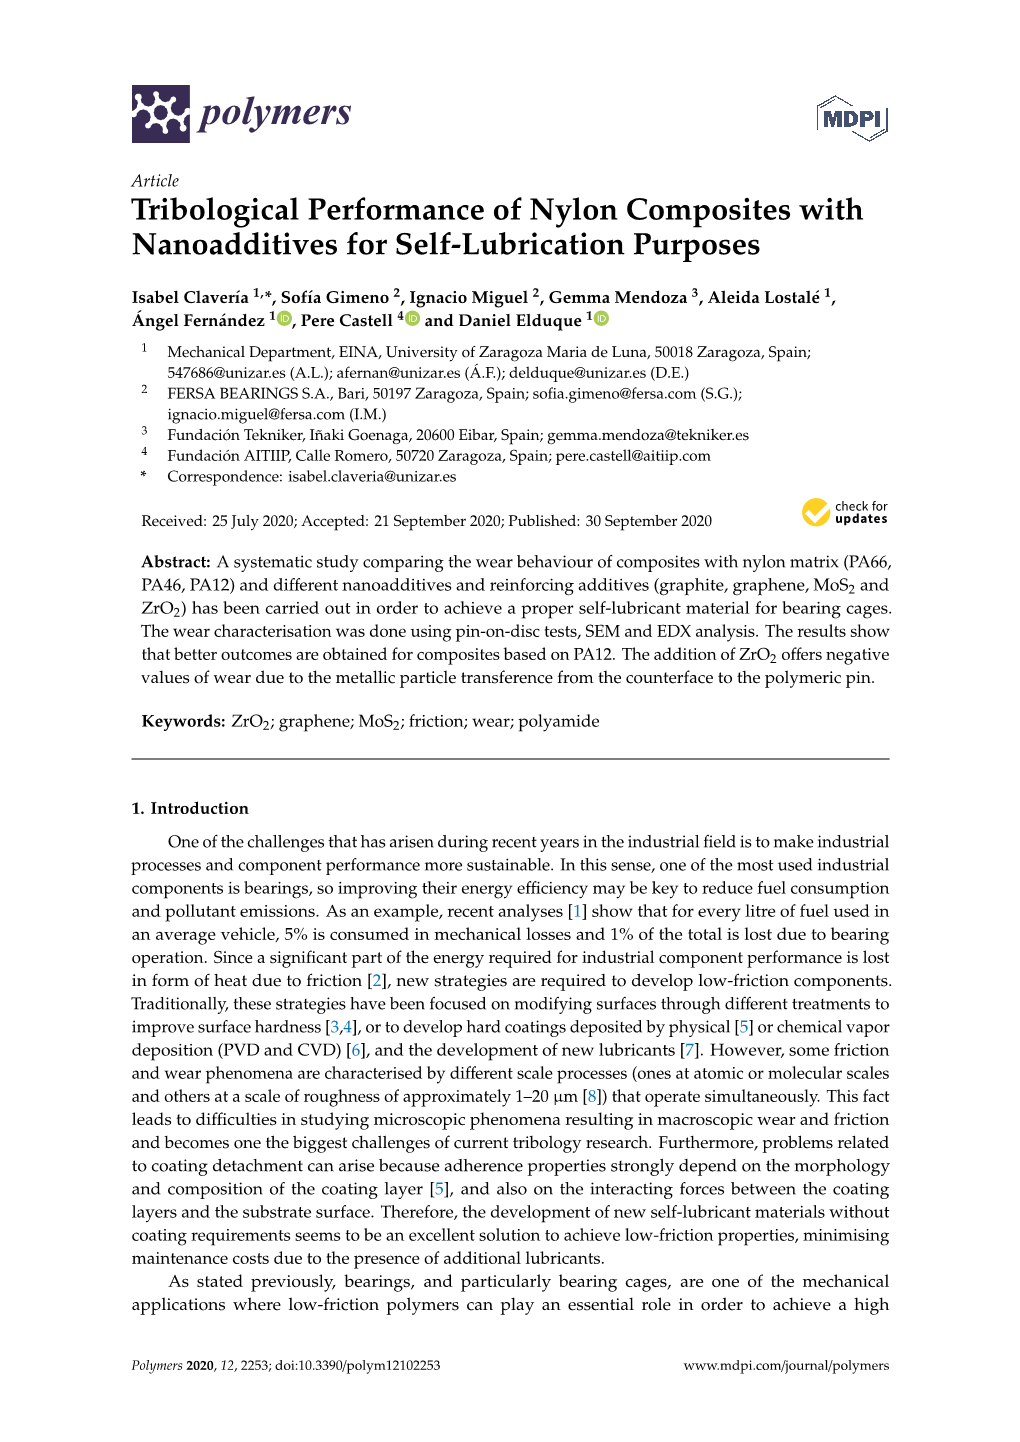 Tribological Performance of Nylon Composites with Nanoadditives for Self-Lubrication Purposes